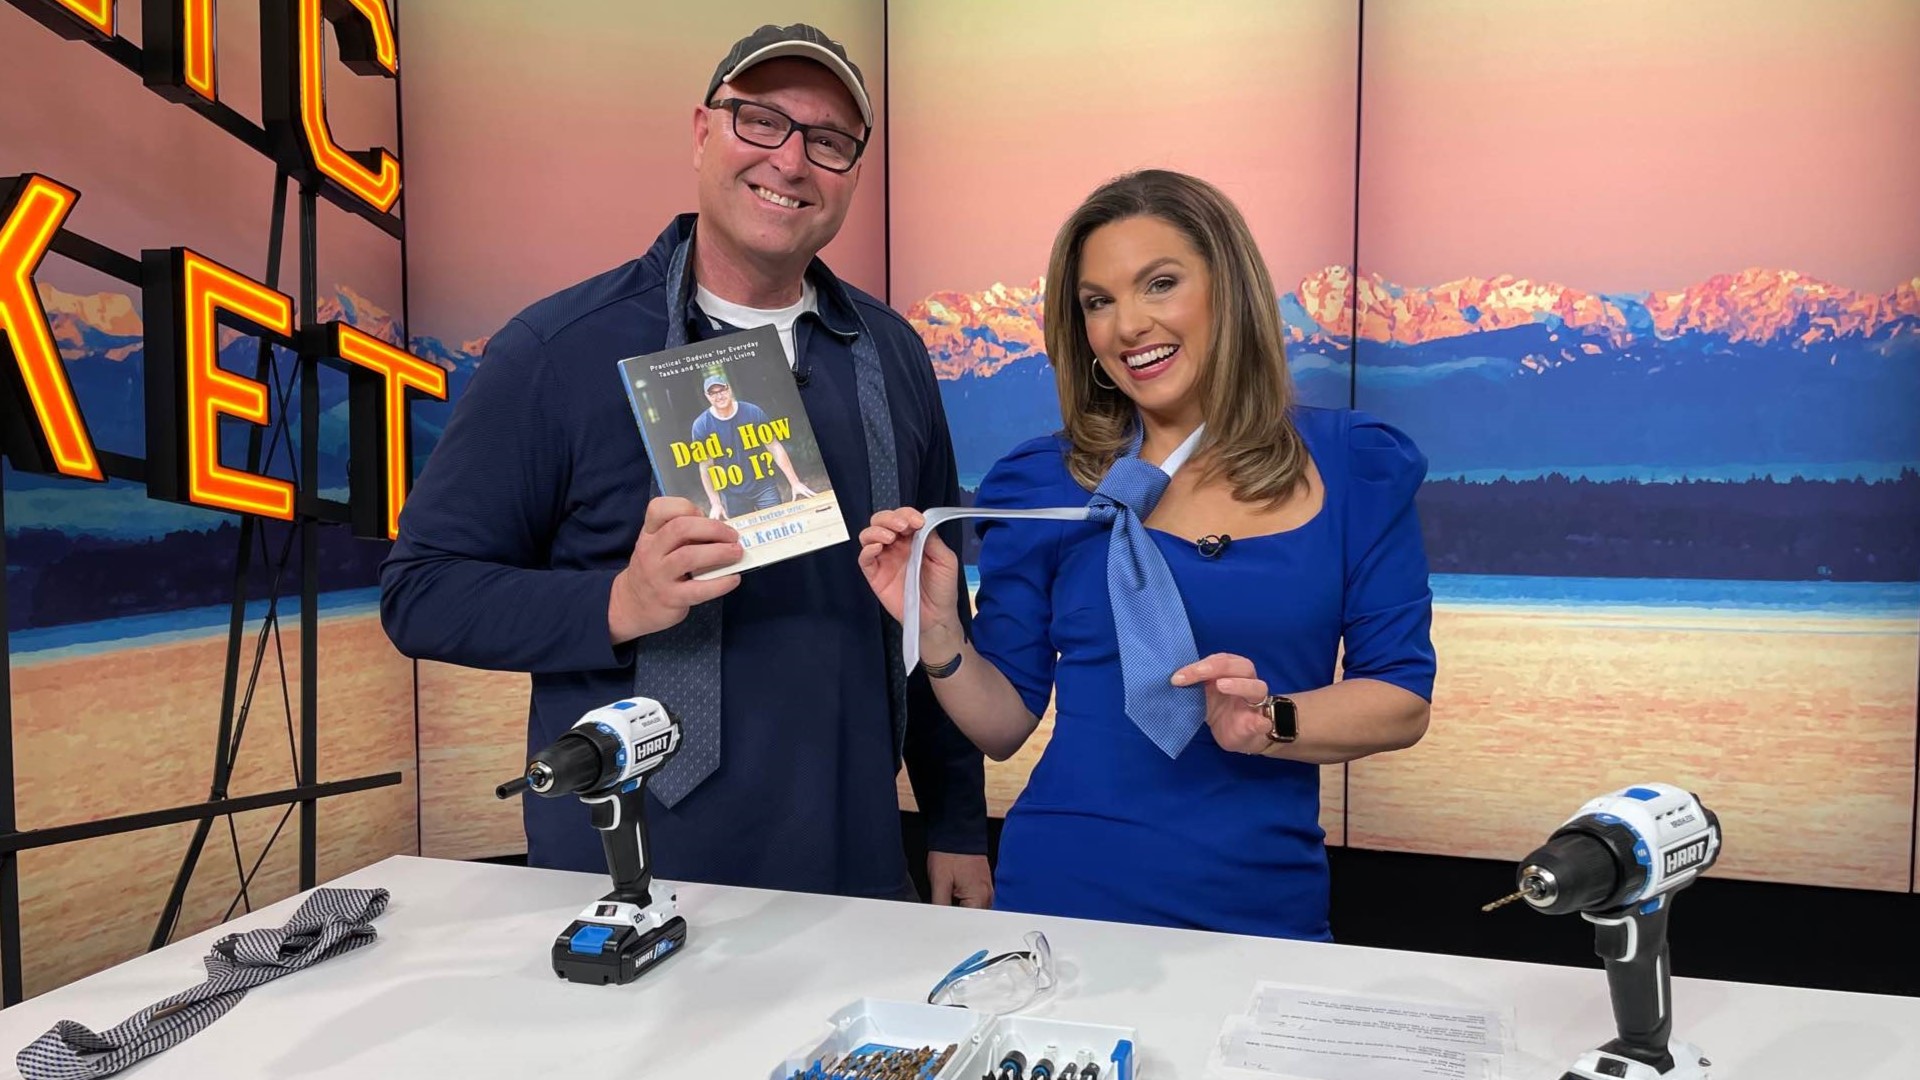 Seattle dad and author Rob Kenney of the YouTube channel Dad, How Do I? shows us how to tie a tie and use a cordless drill! #newdaynw